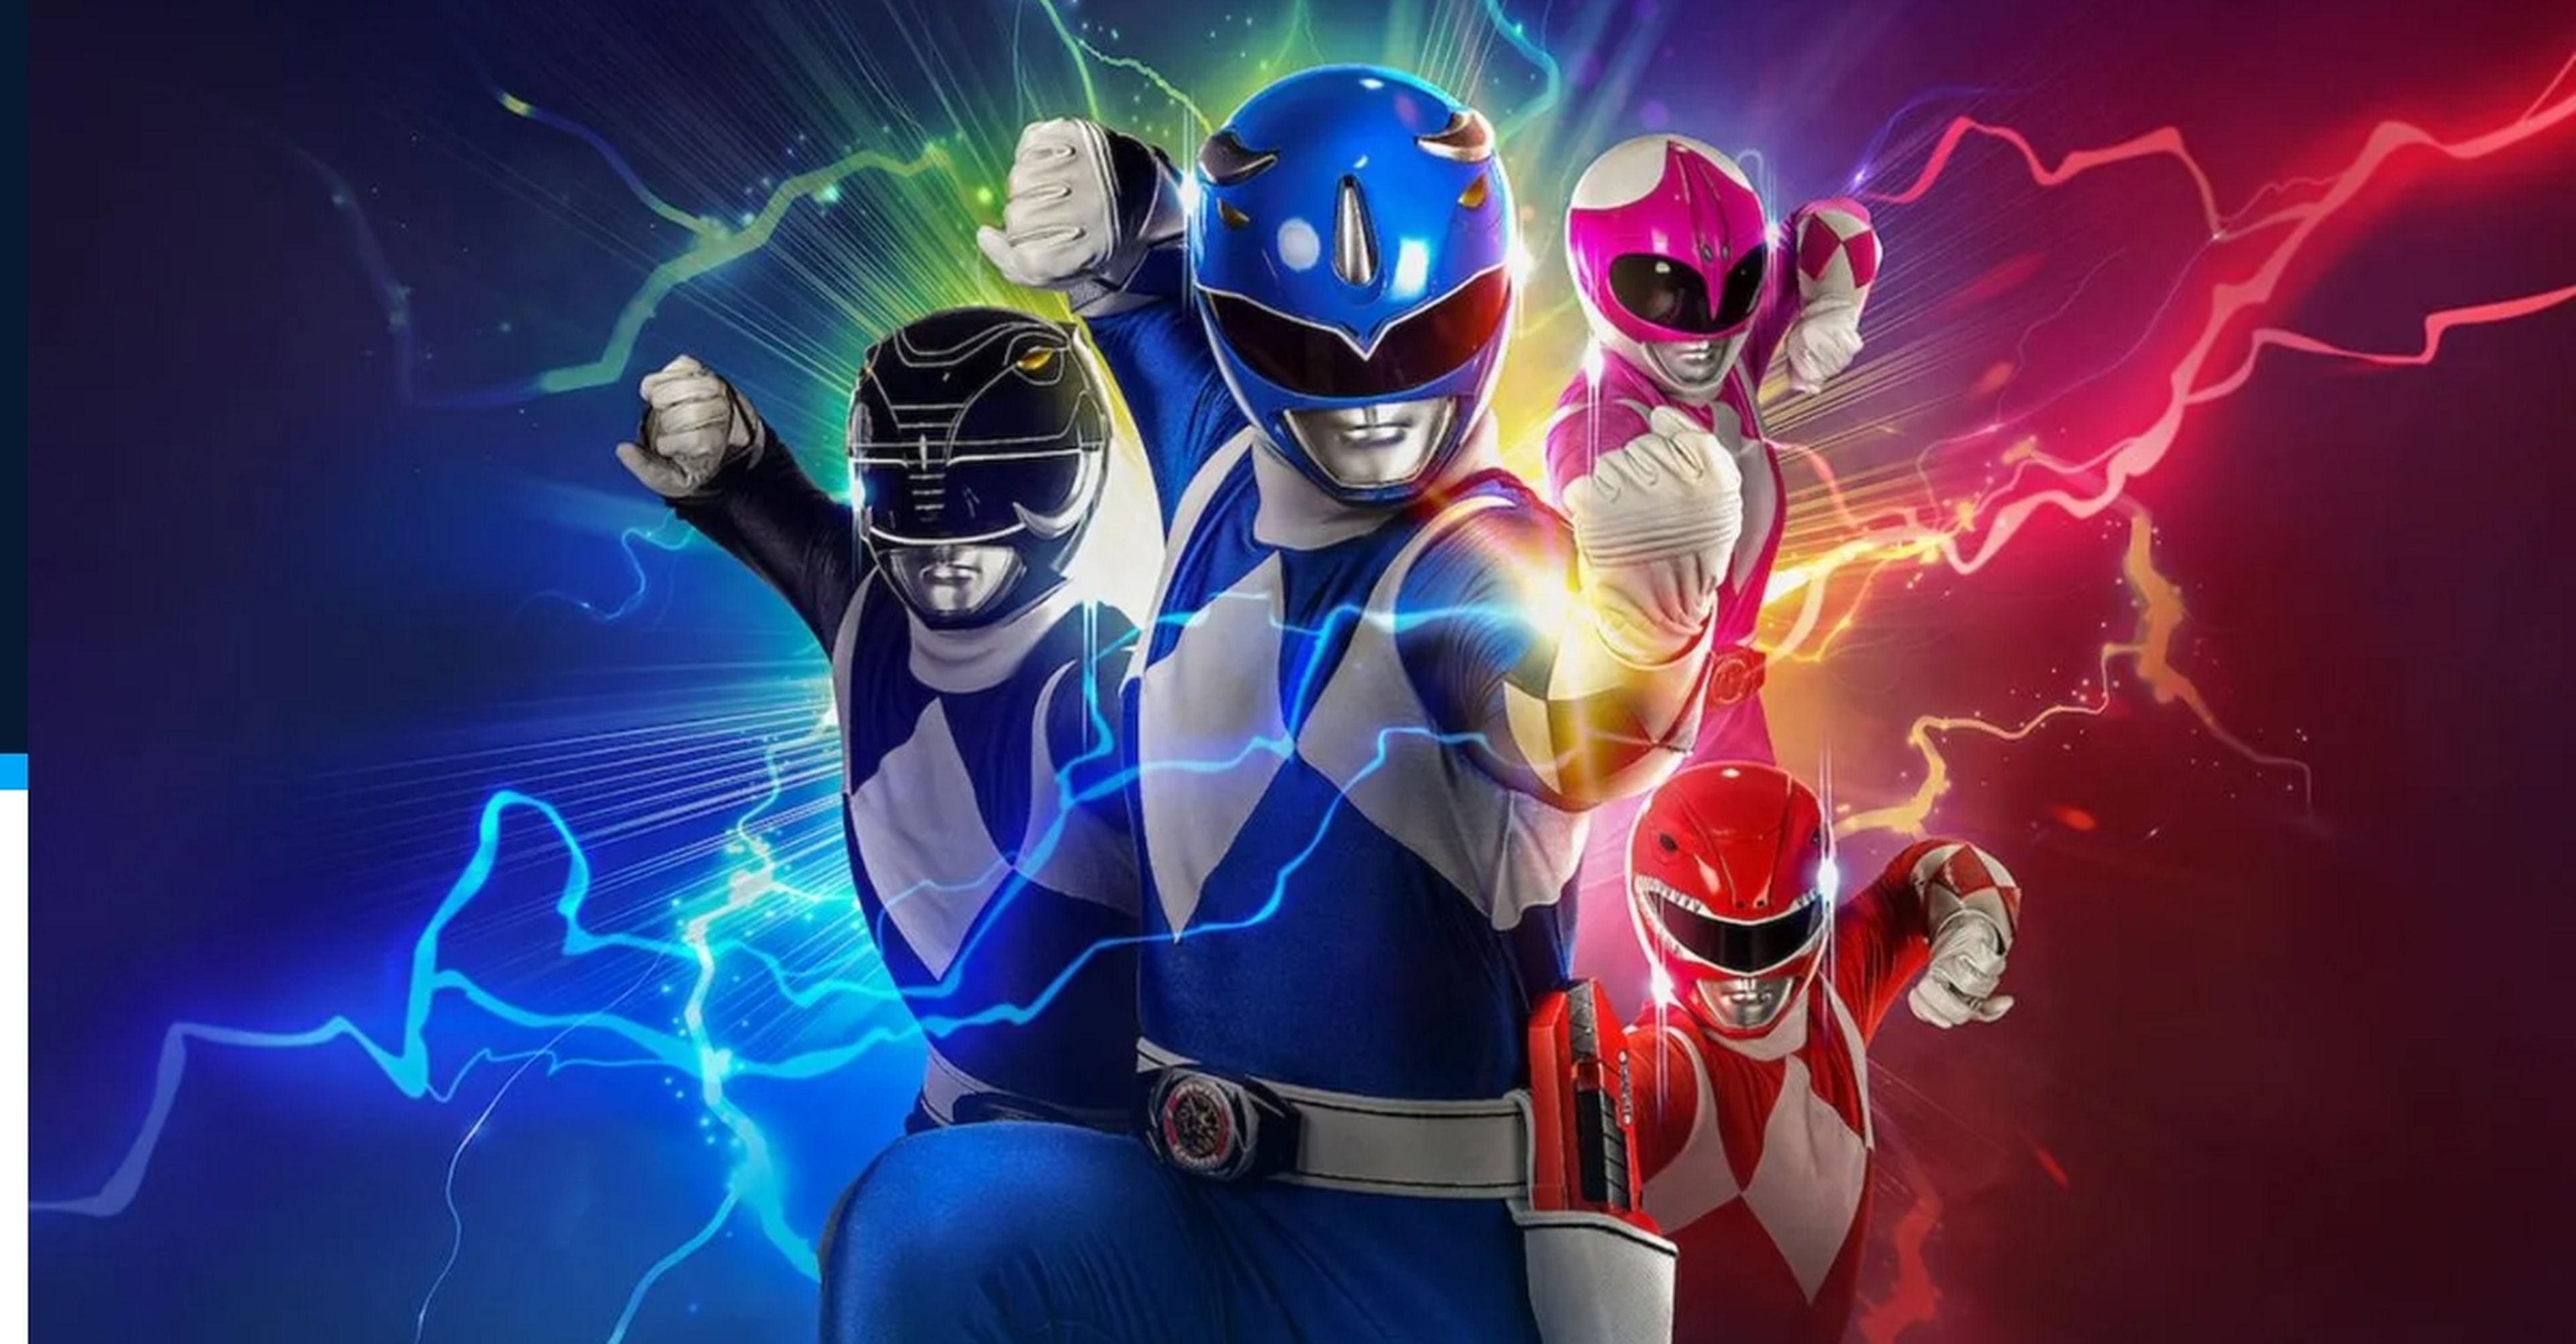 Mighty Morphin Power Rangers: ayer, hoy y siempre